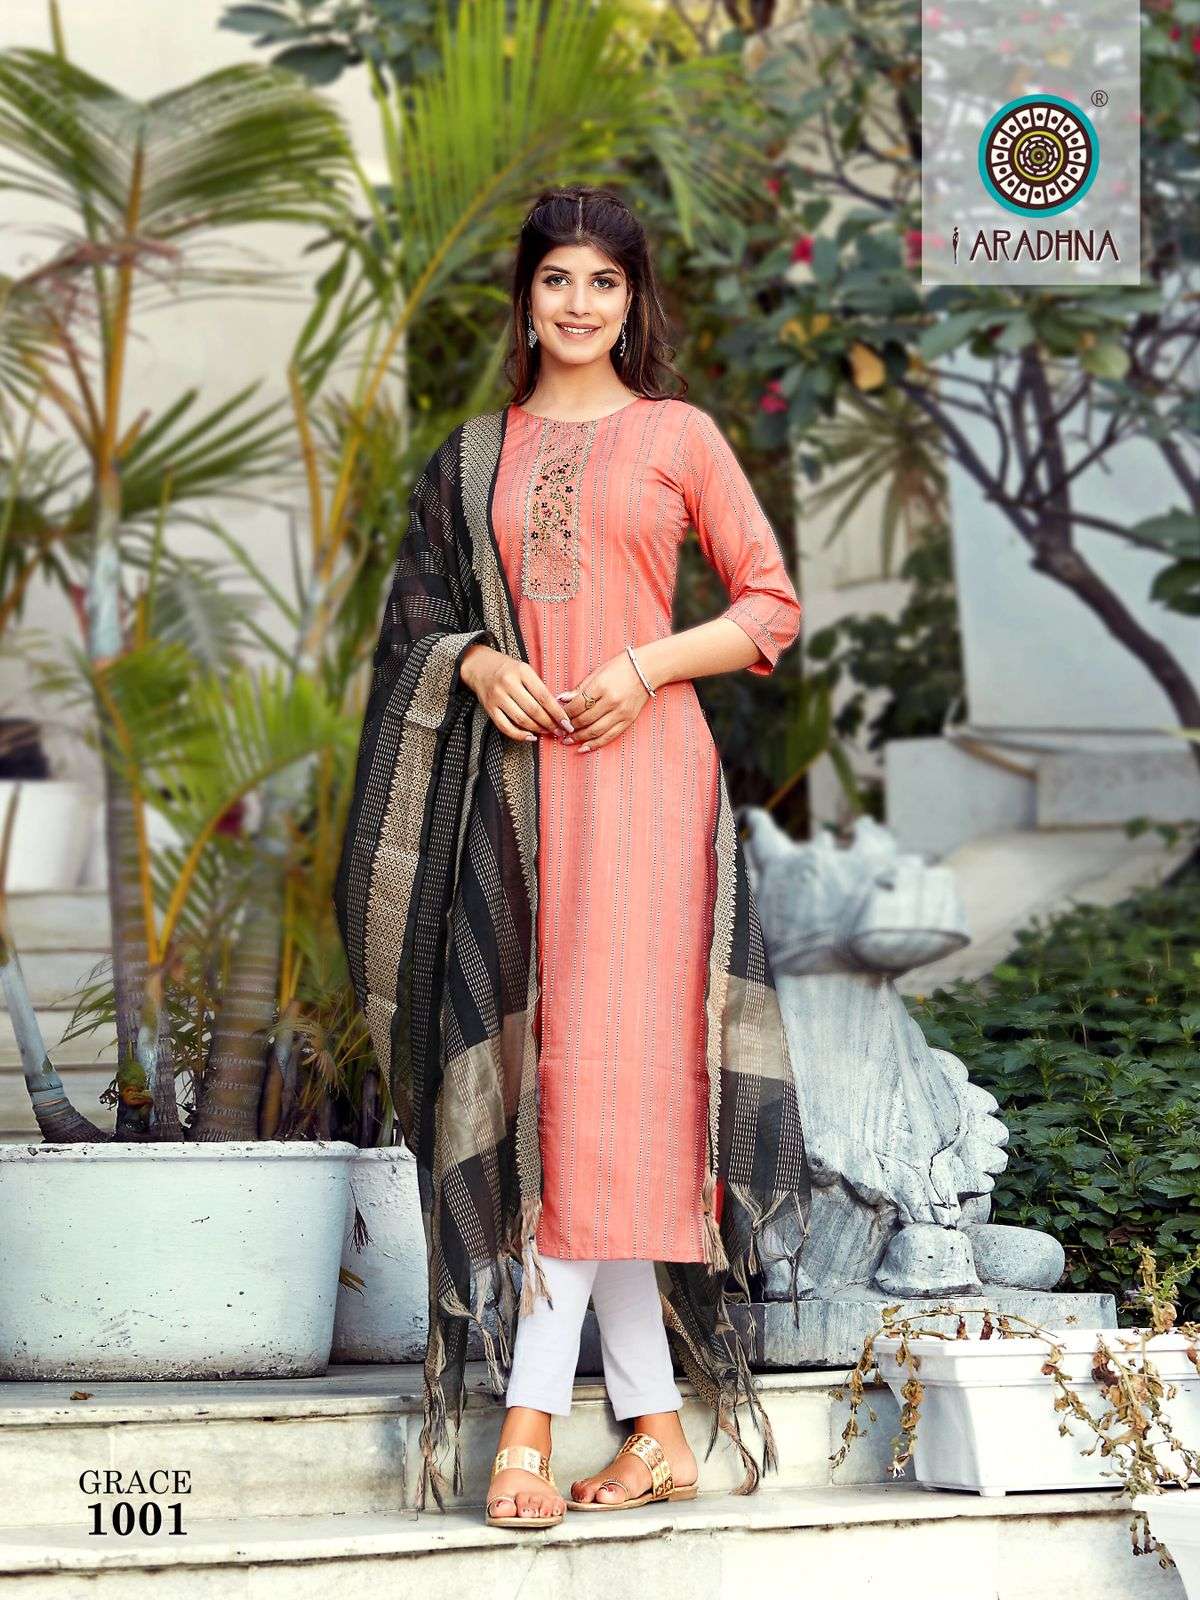 ARADHNA FASHION PRESENTS GRACE 1 WEAVE COTTON WITH EMBROIDERY WHOLESALE KURTI WITH DUPATTA